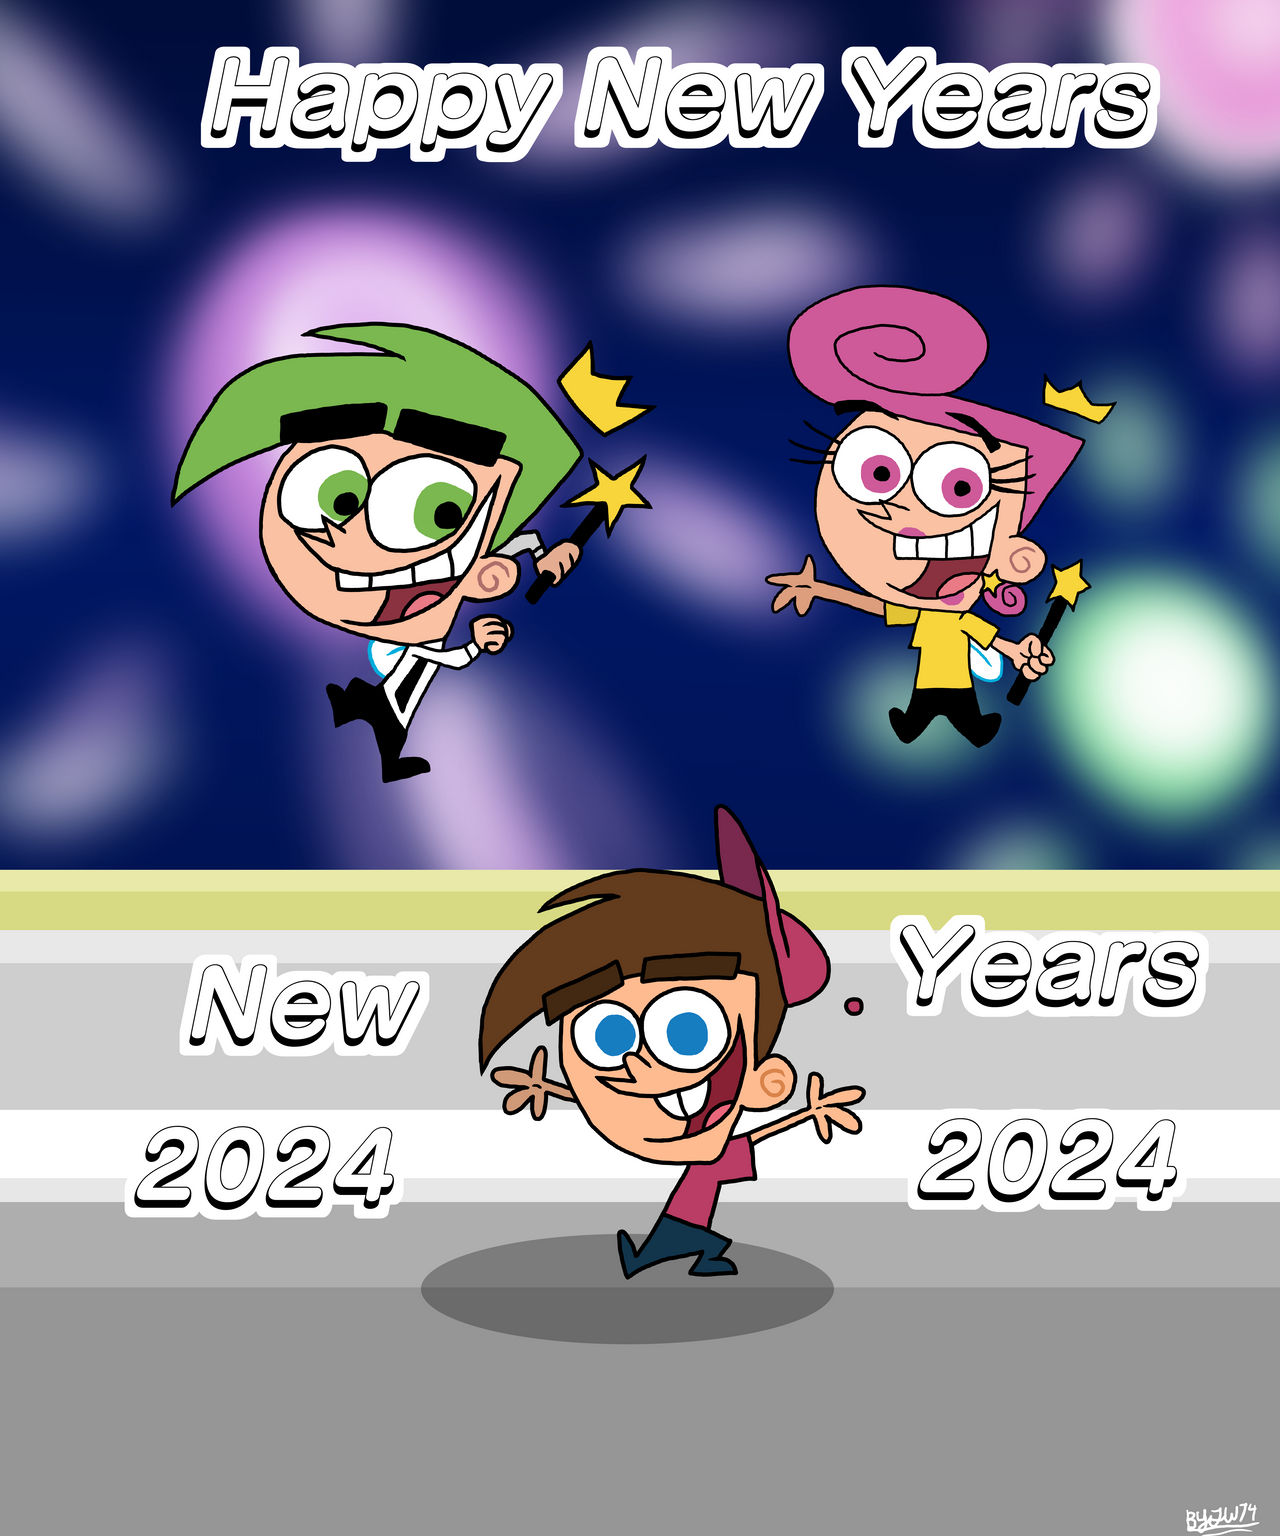 The Fairly Oddparents New Years 2024 ByTw14 by taylorwalls14 on DeviantArt